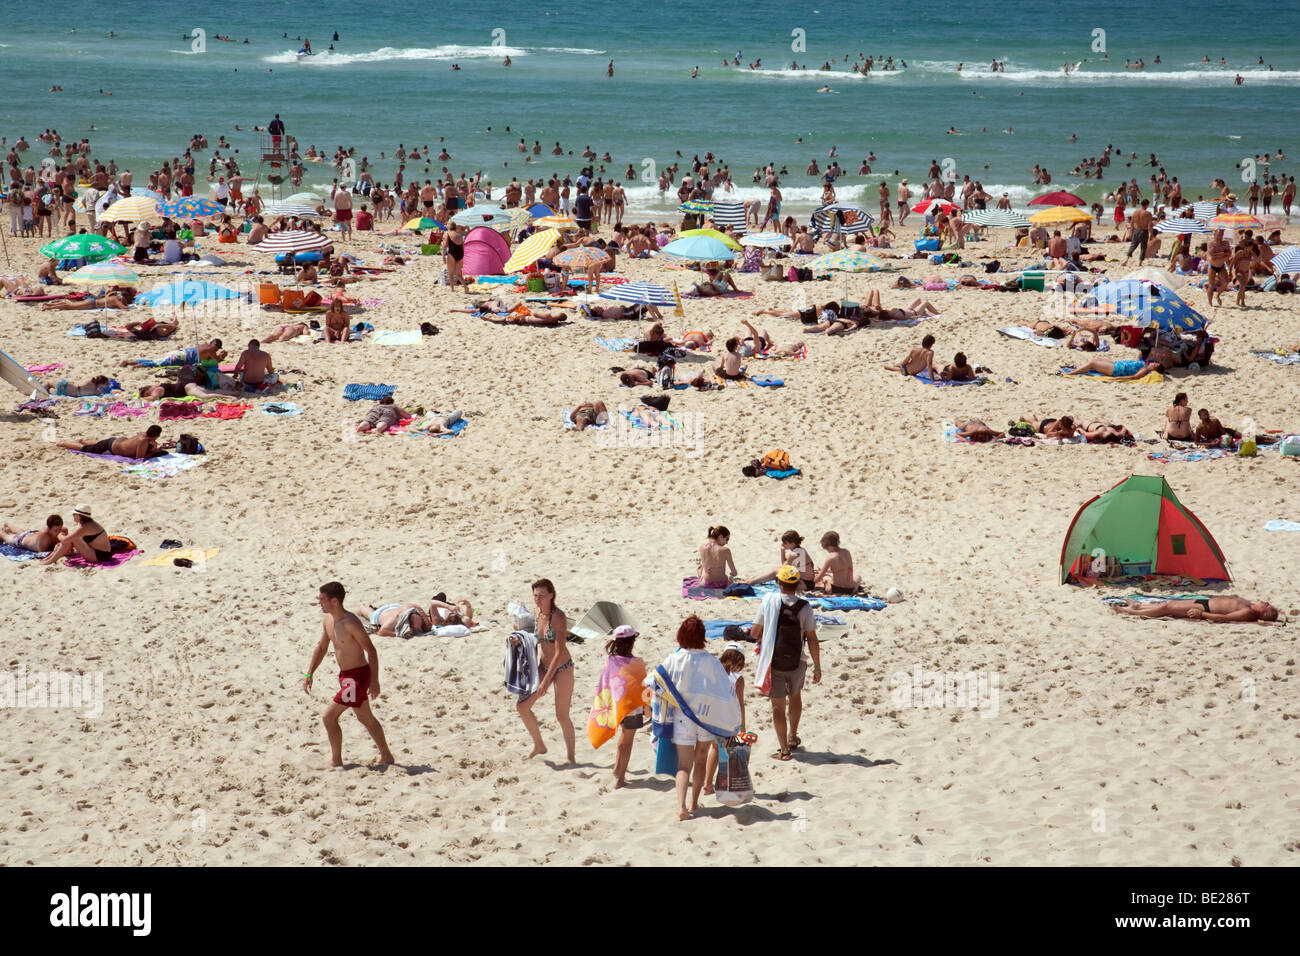 Crowds on the beach at Biscarrosse, Aquitaine, France Stock Photo